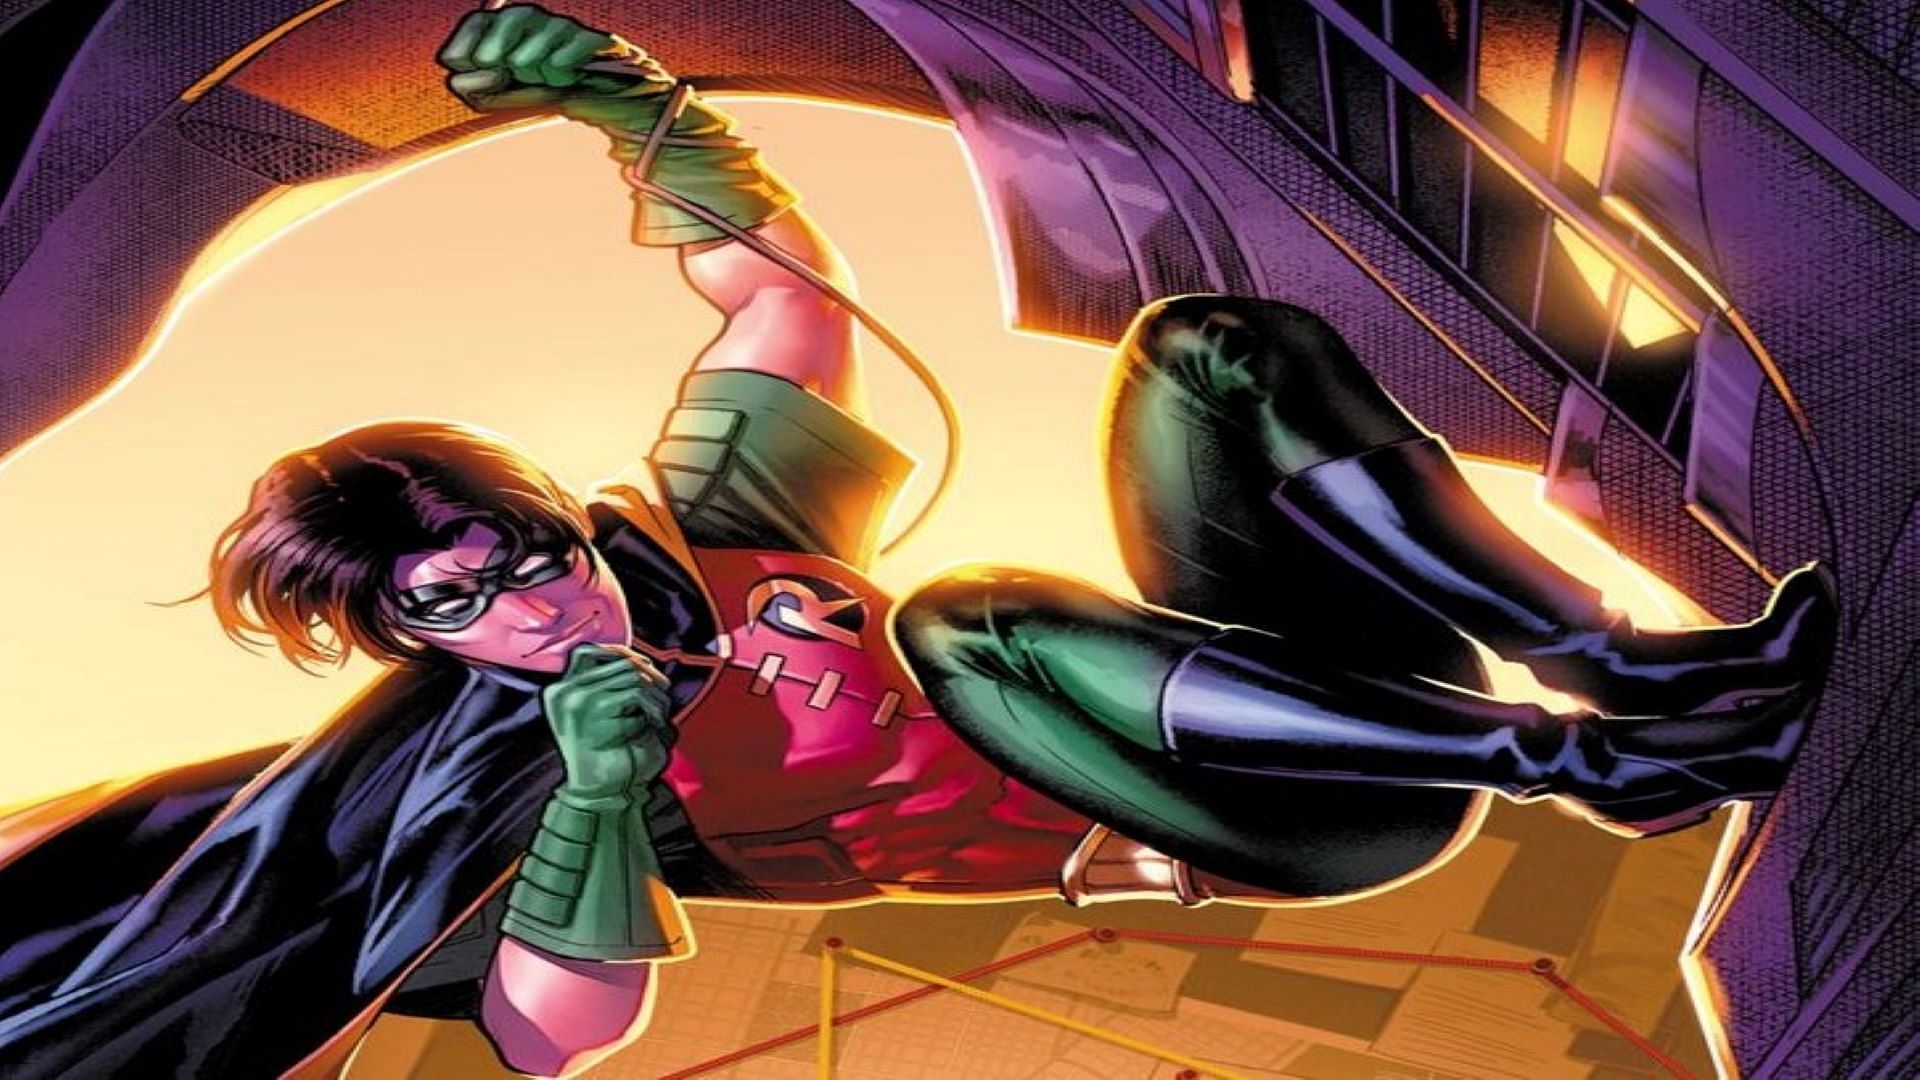 Wade457 on X Hey folks just wanted to tweet out that I love  BelenOrtega Drawing of Tim Drake as Robin Gorgeous stuff  httpstcohP3UZFdlpq  X